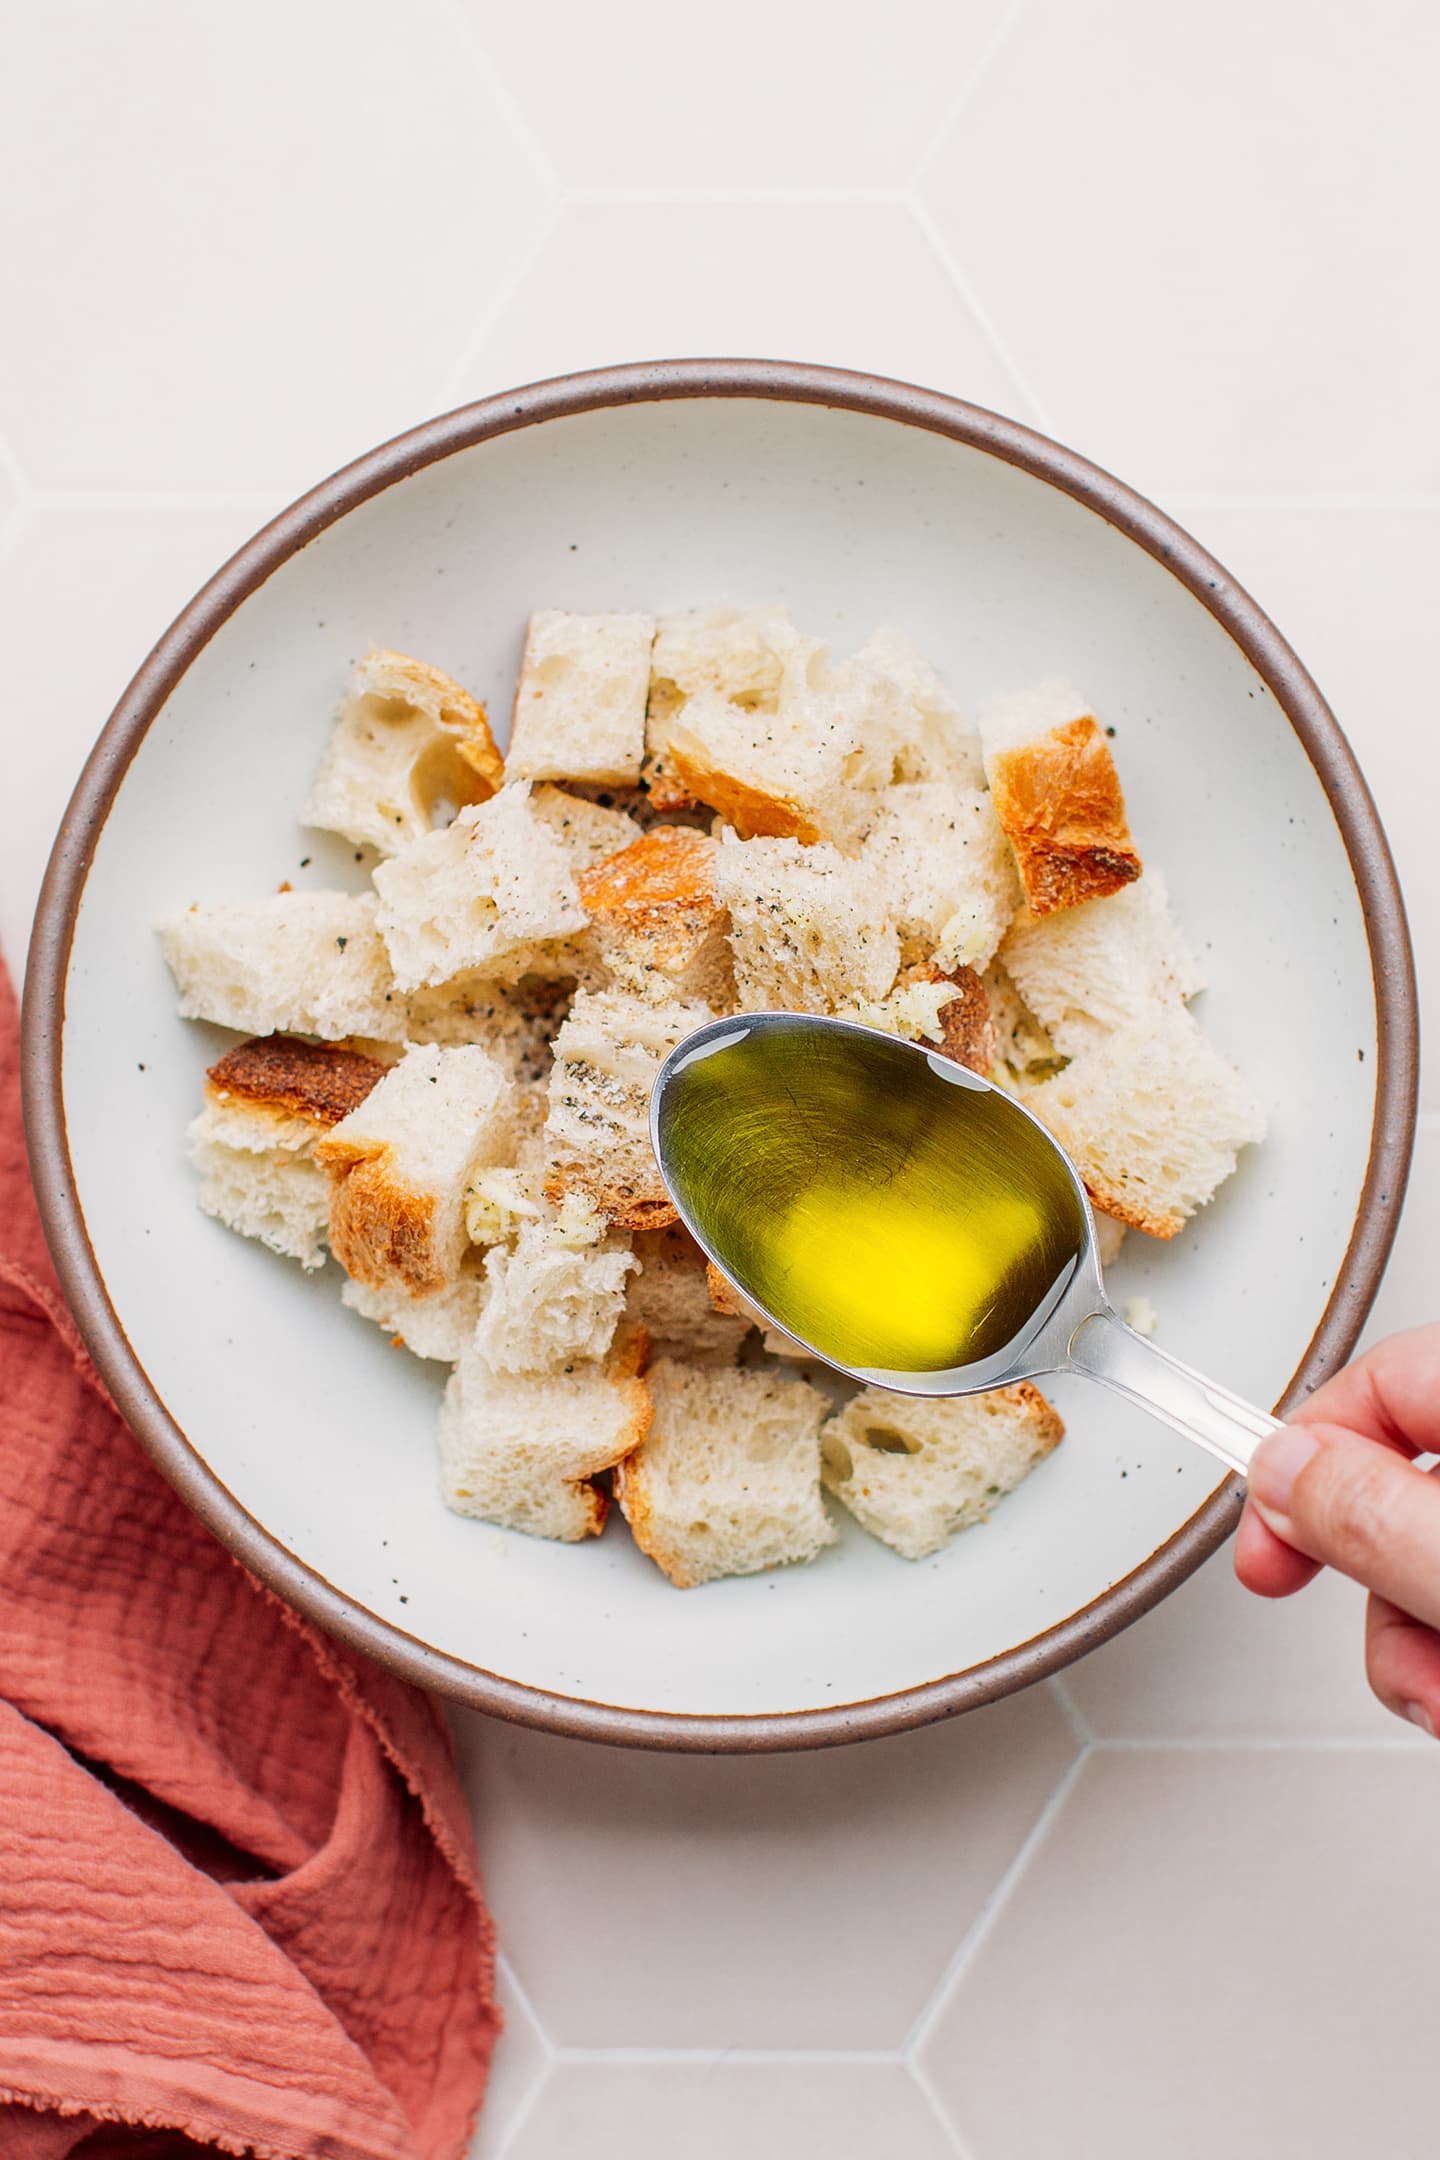 Pouring olive oil over diced bread.